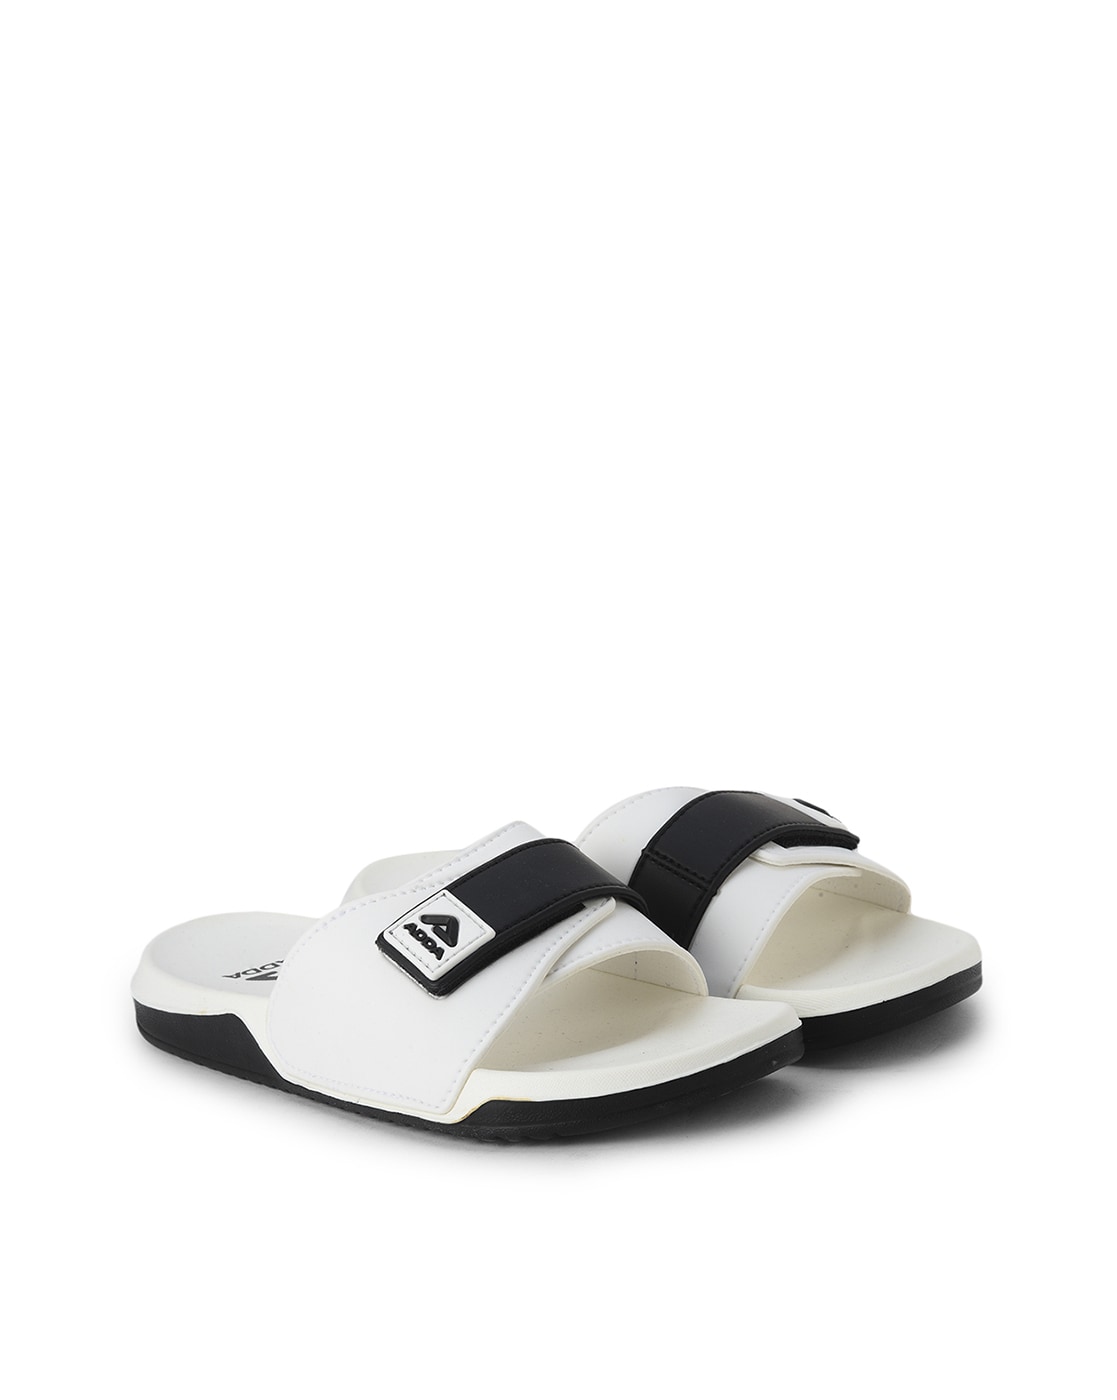 Adda Mens Daily Wear PVC Slipper at best price in Kanpur | ID: 21068131791-happymobile.vn